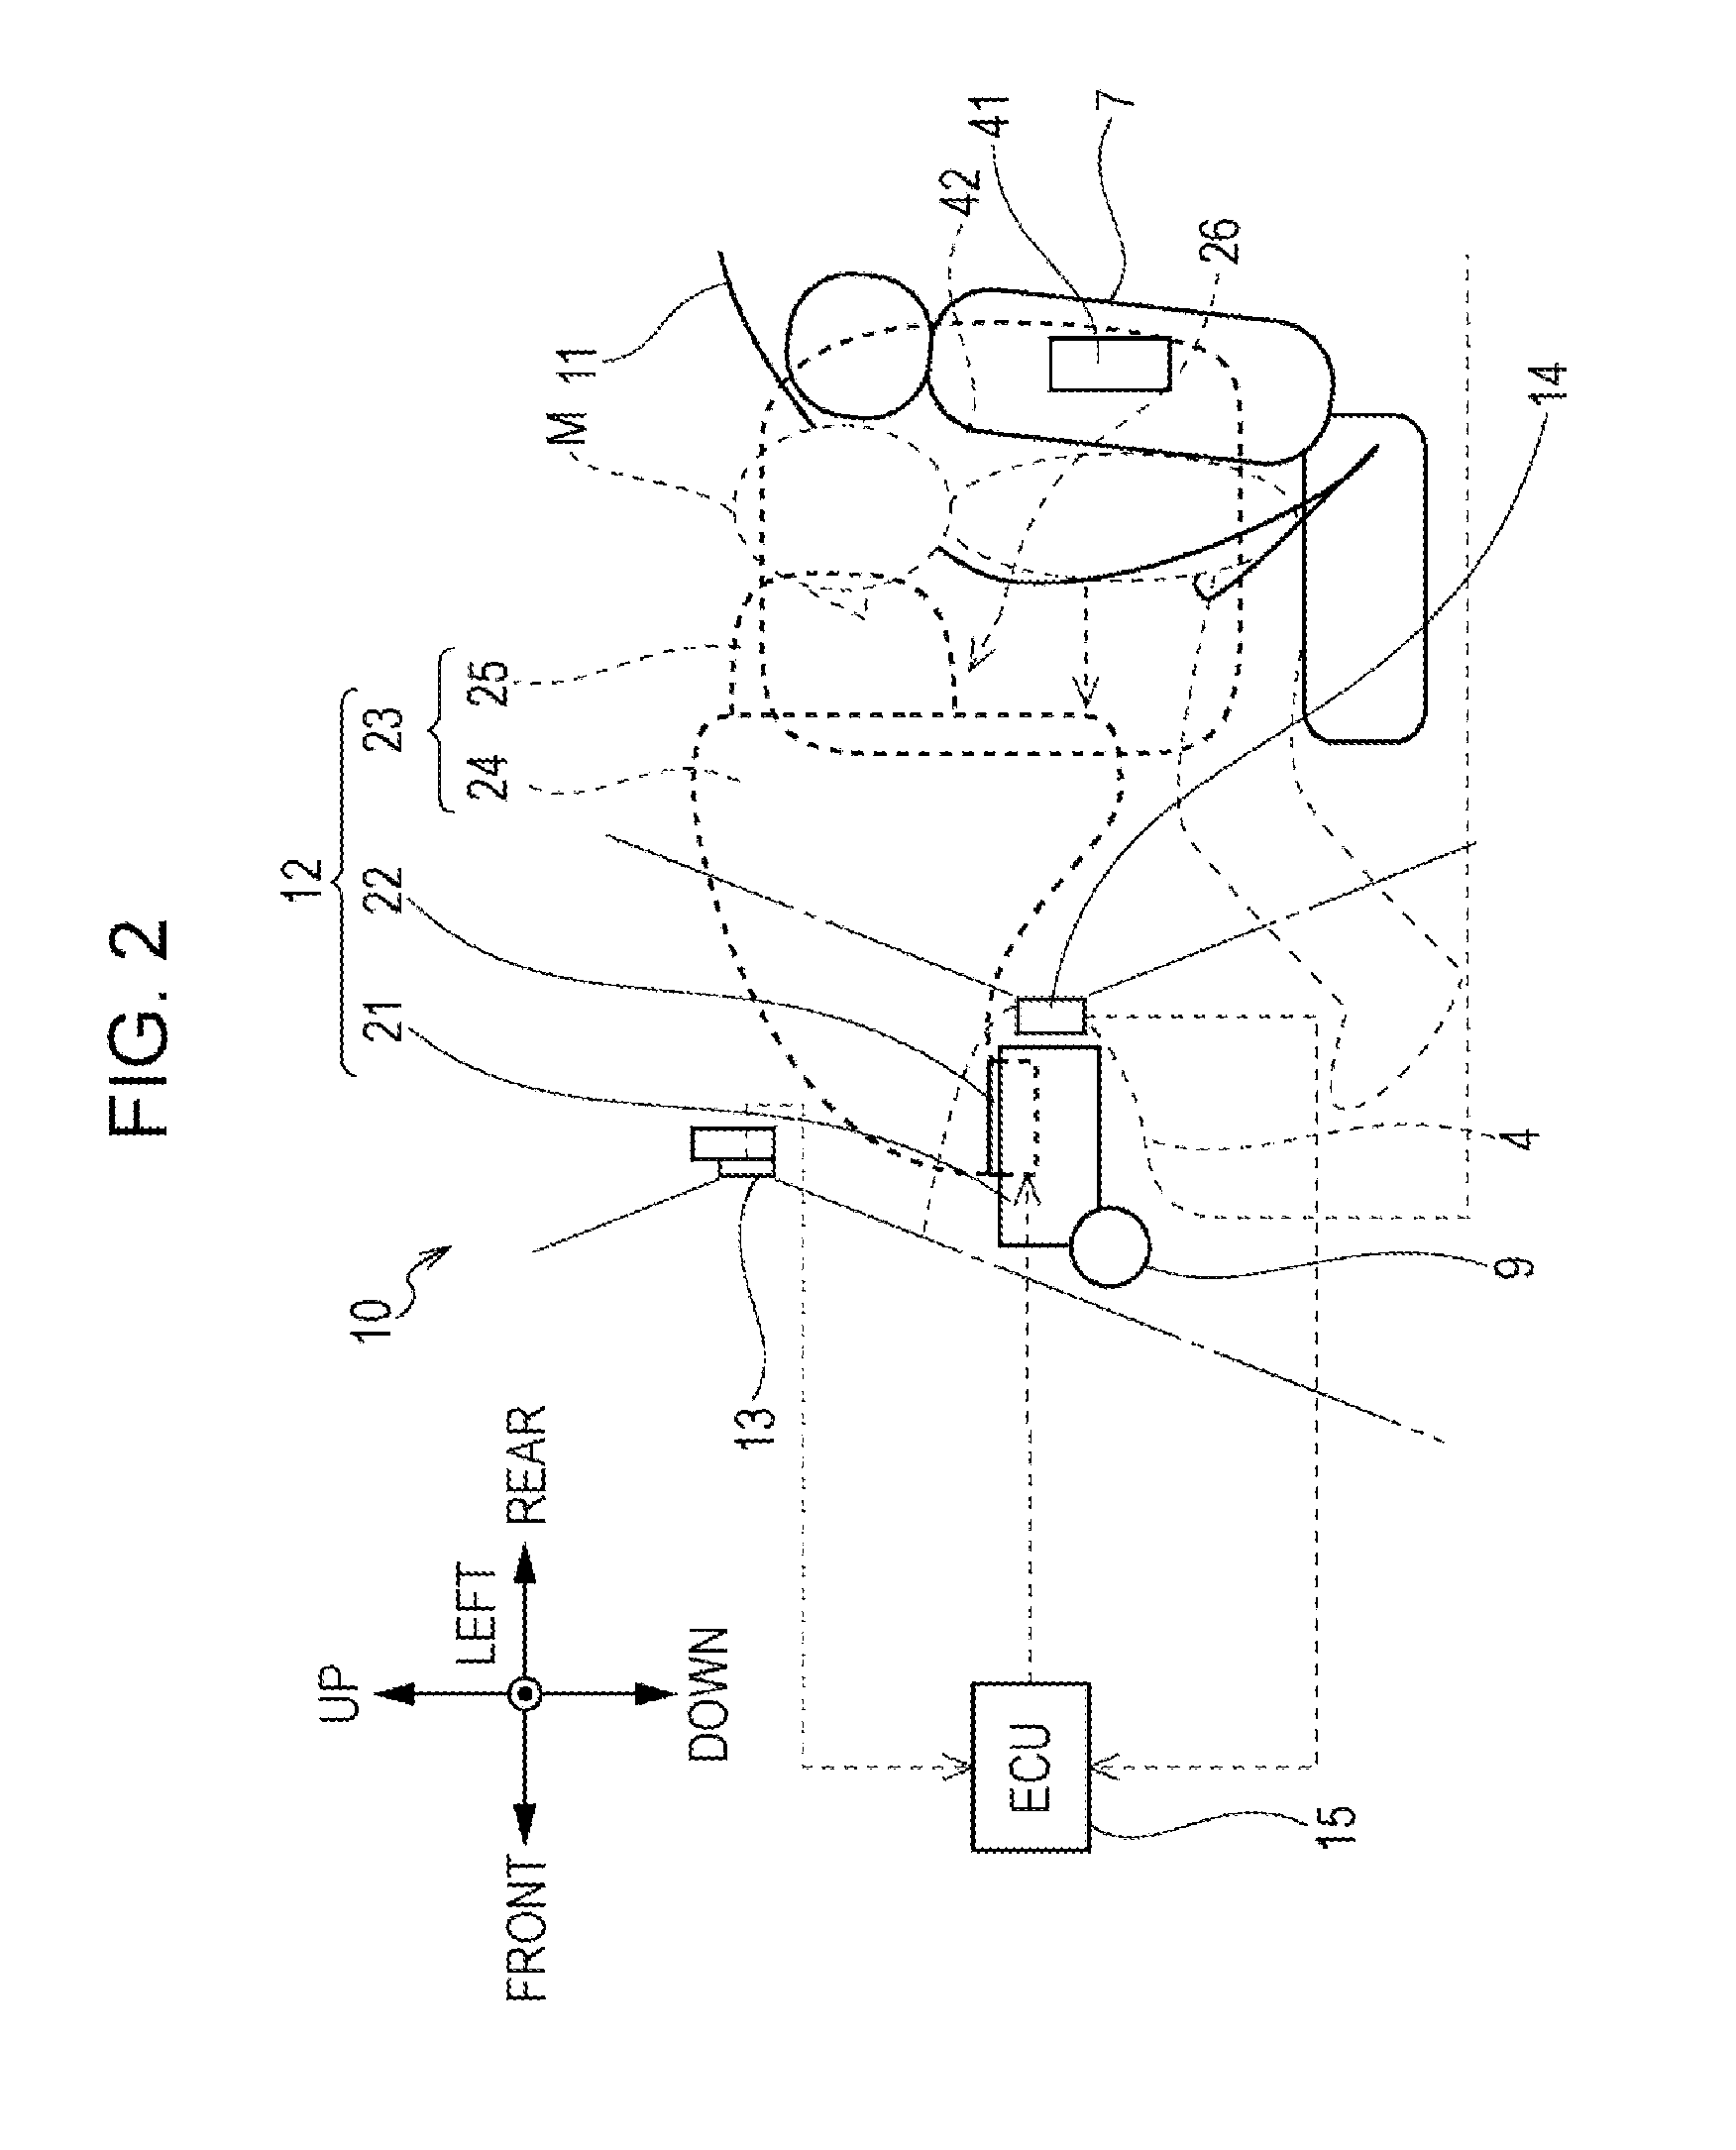 Occupant protection apparatus for vehicle